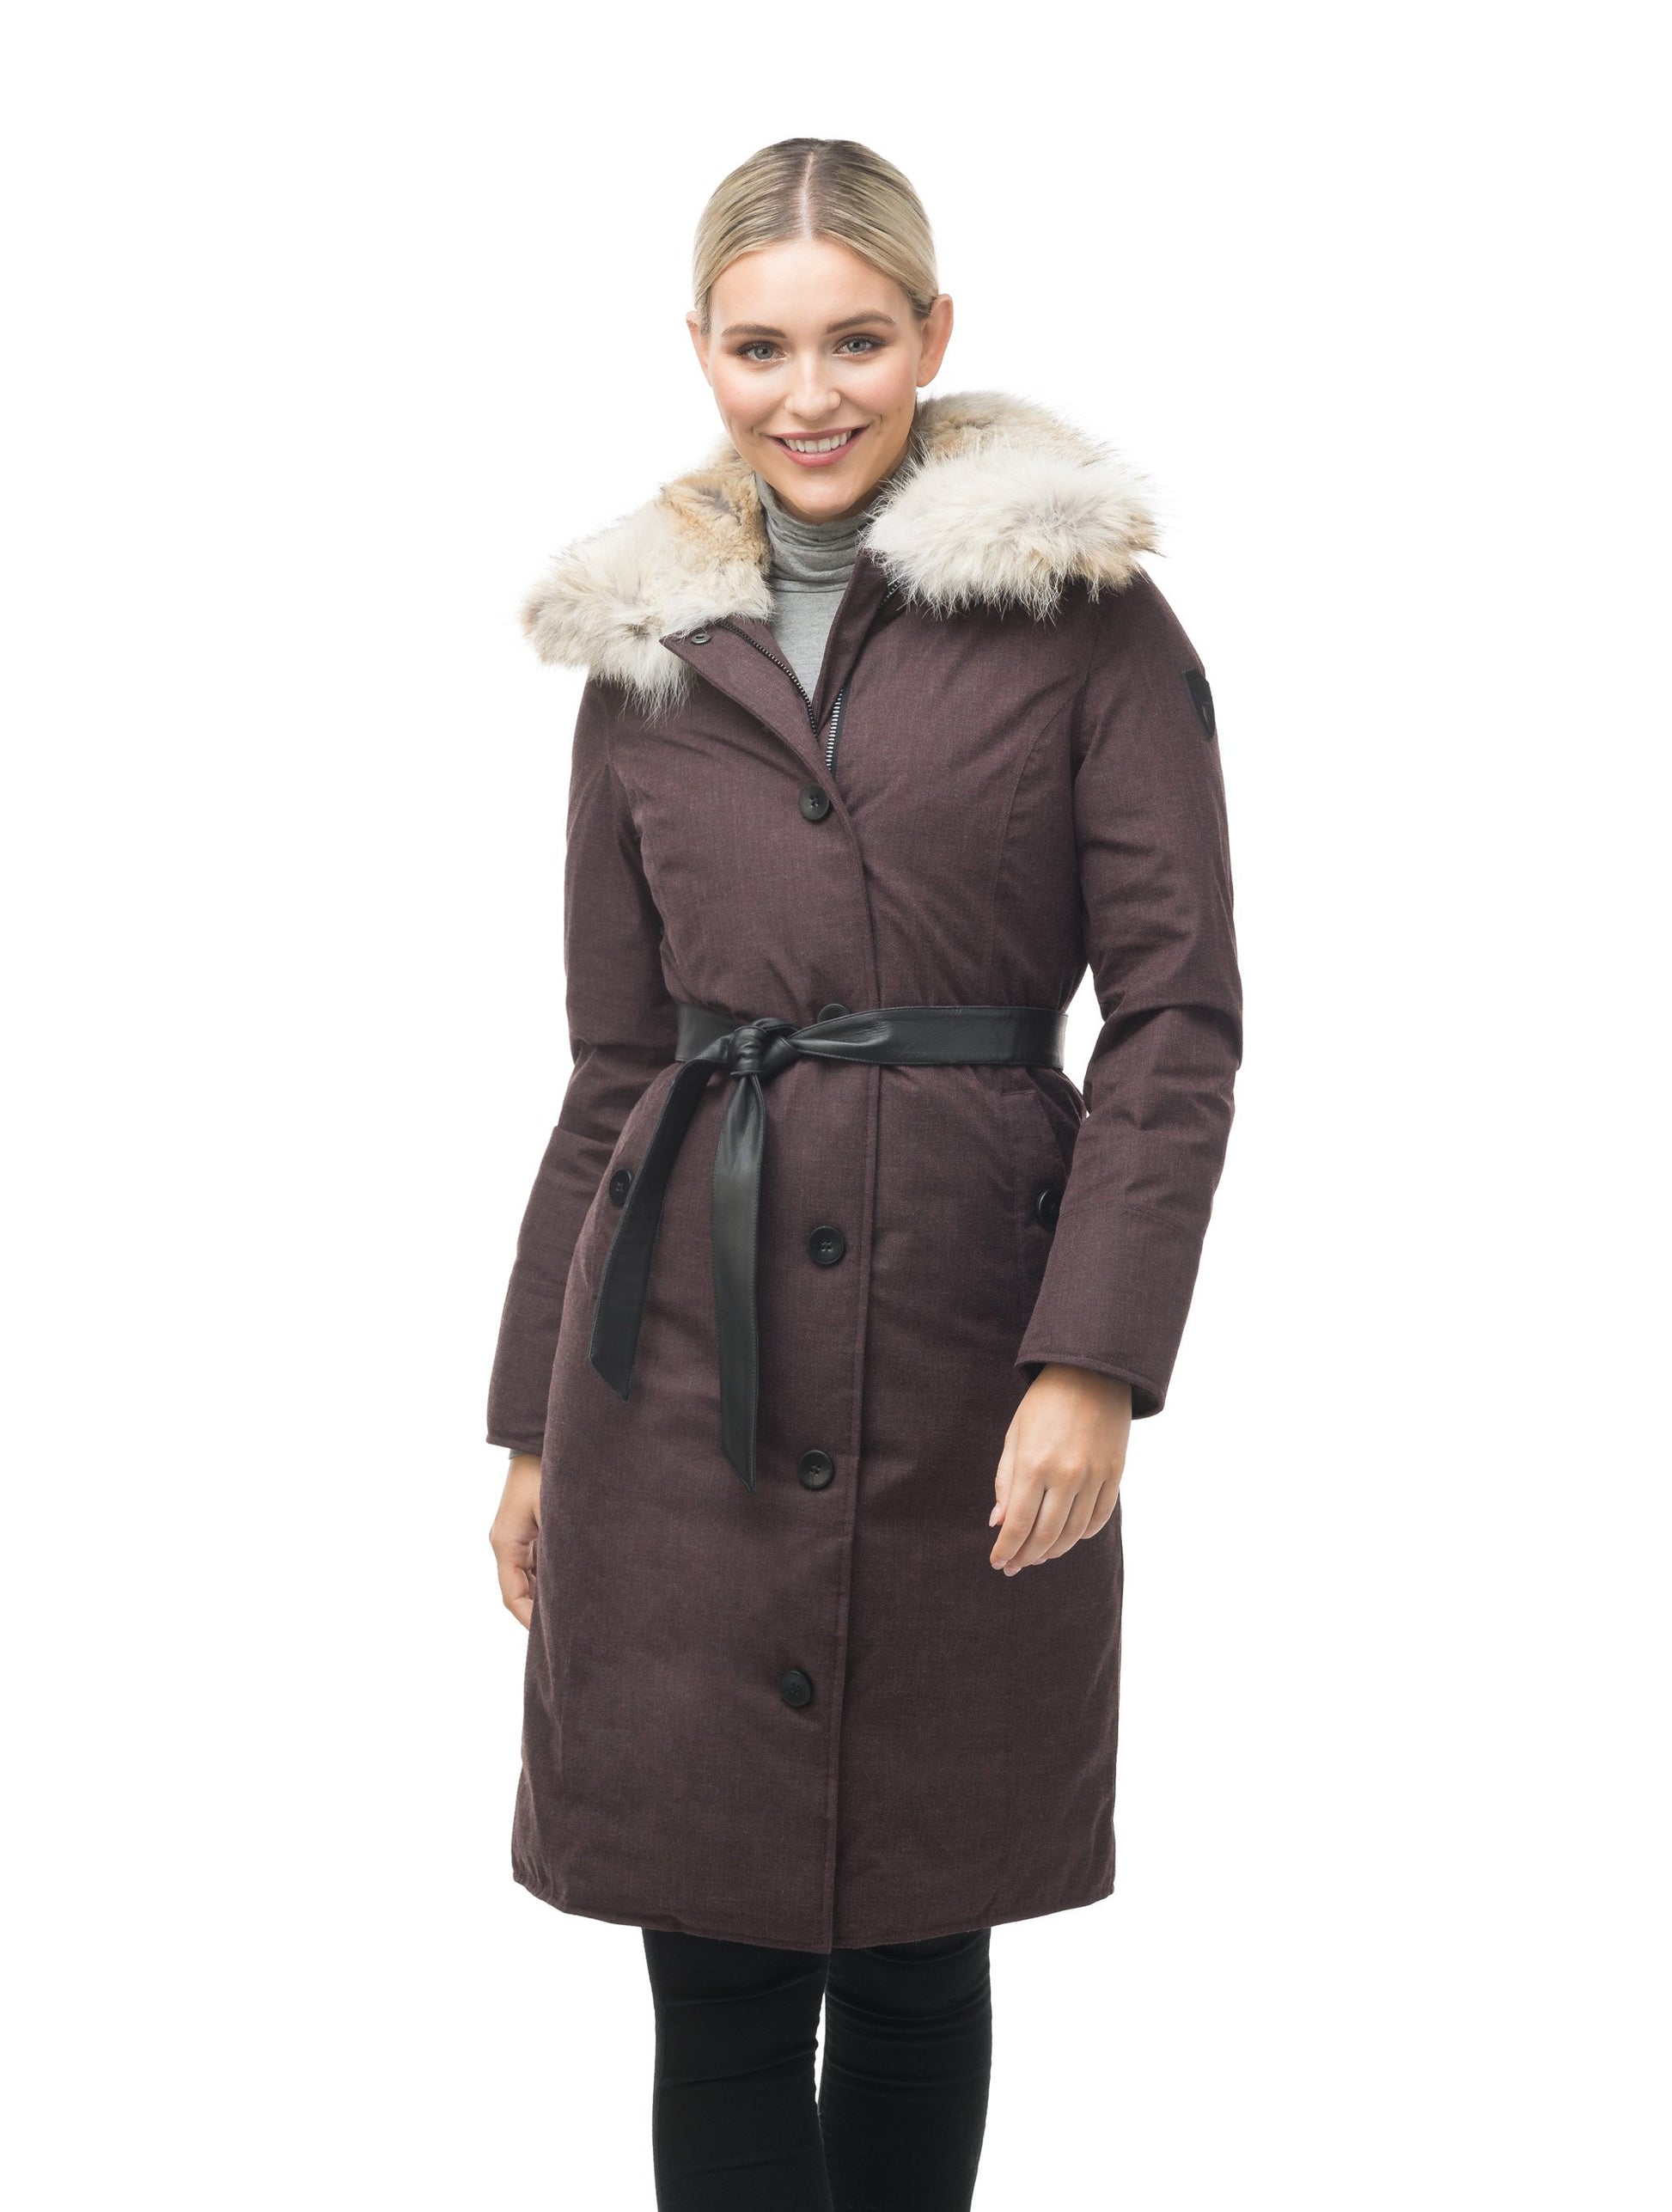 Women's lightweight down filled parka with a removable fur collar and a washable, Japanese DWR Leather belt in H. Burgundy